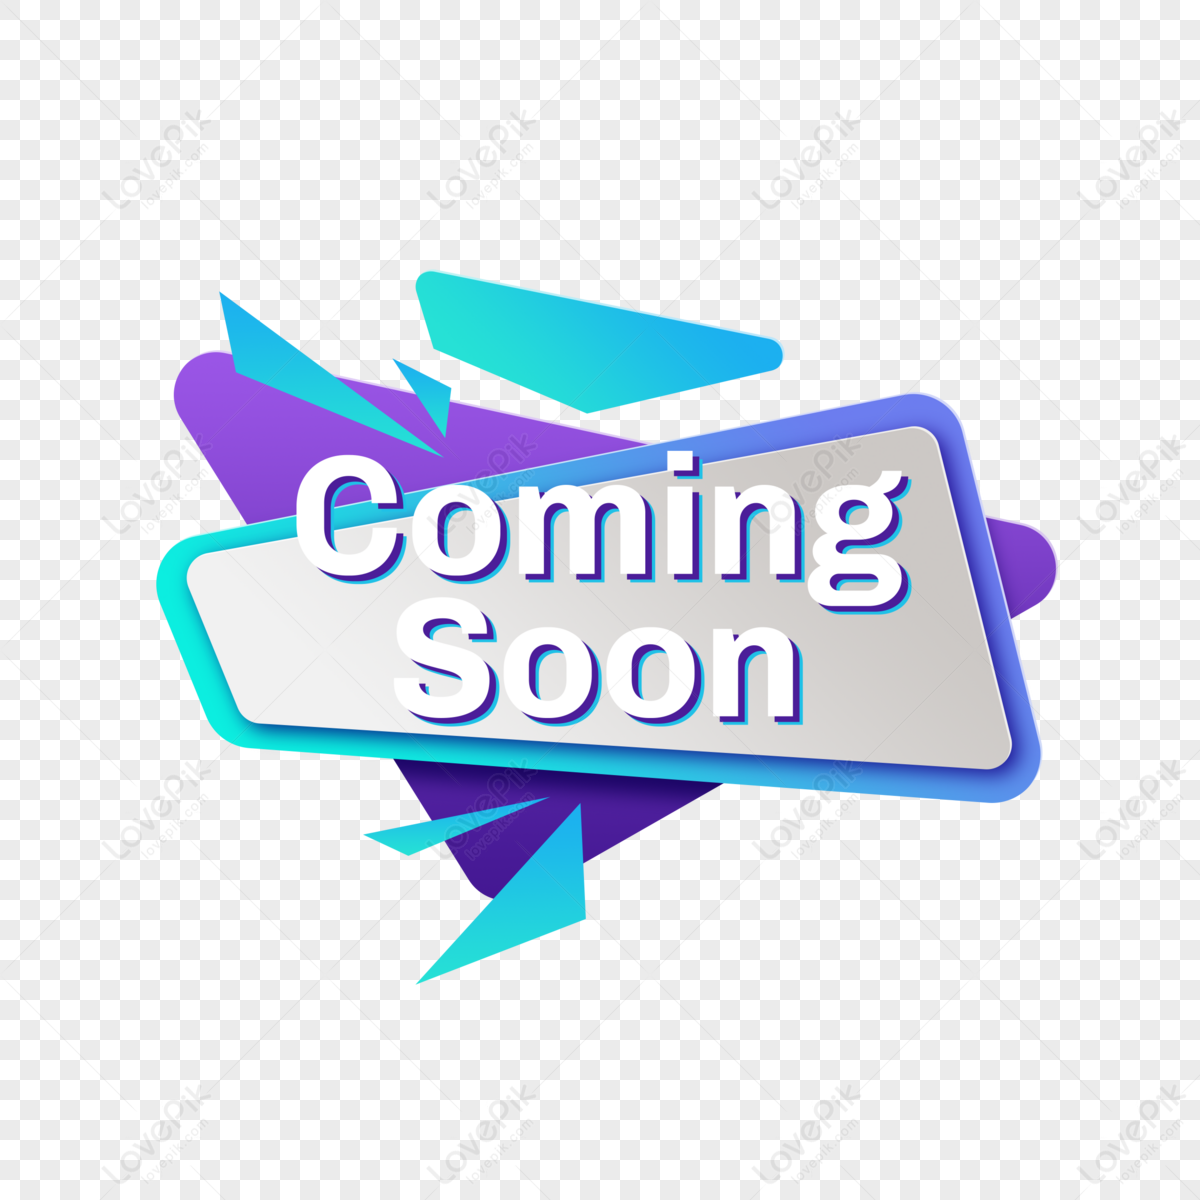 Coming Soon Design Vector PNG Images, Coming Soon Logo Vector Template  Design Illustration, Next, Commerce, Advert PNG Image For Free Download